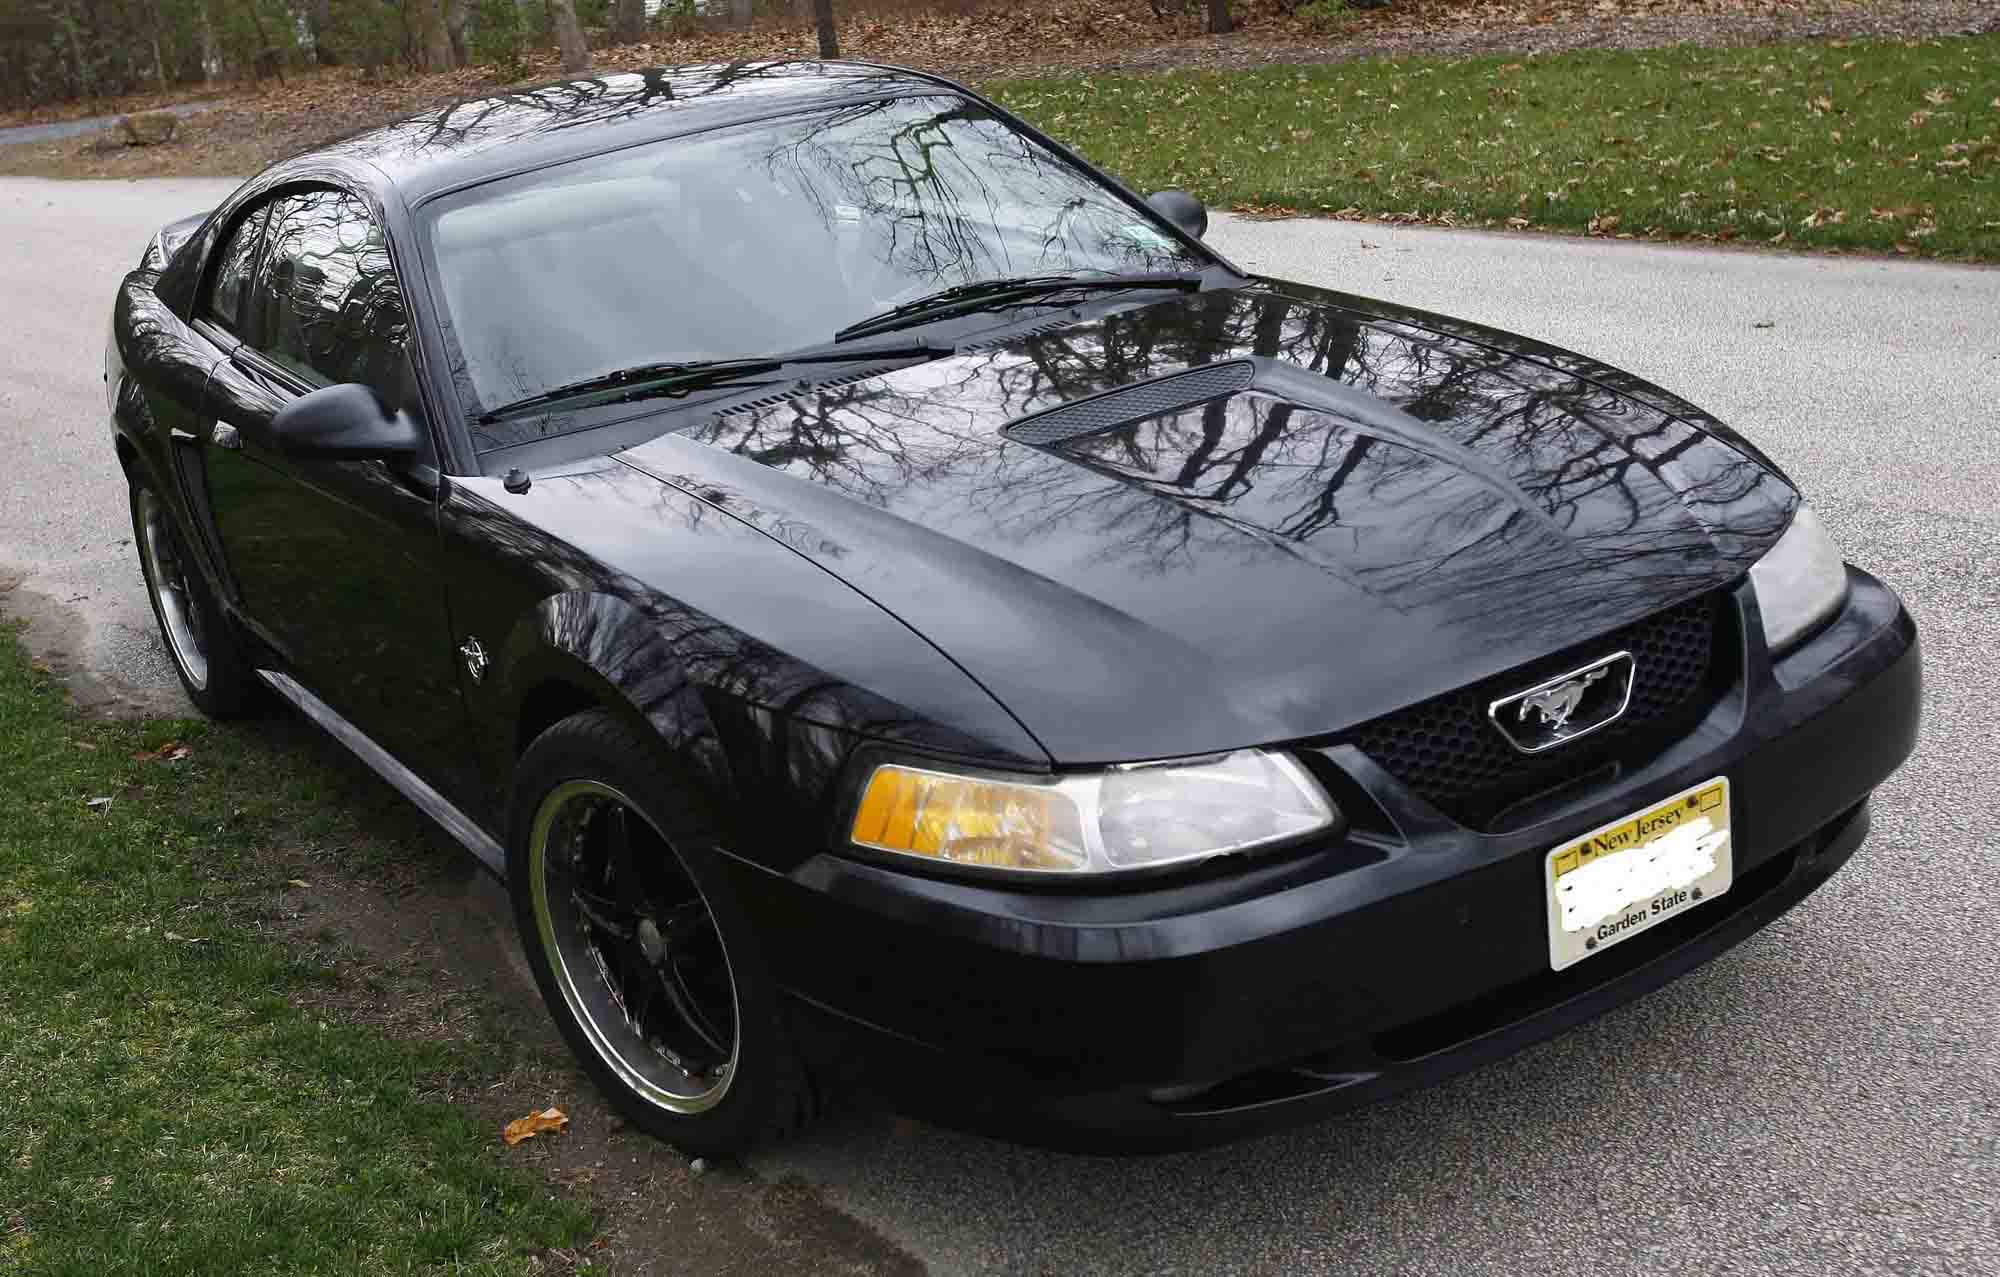 '99 Mustang GT for sale - LS1TECH - Camaro and Firebird Forum Discussion